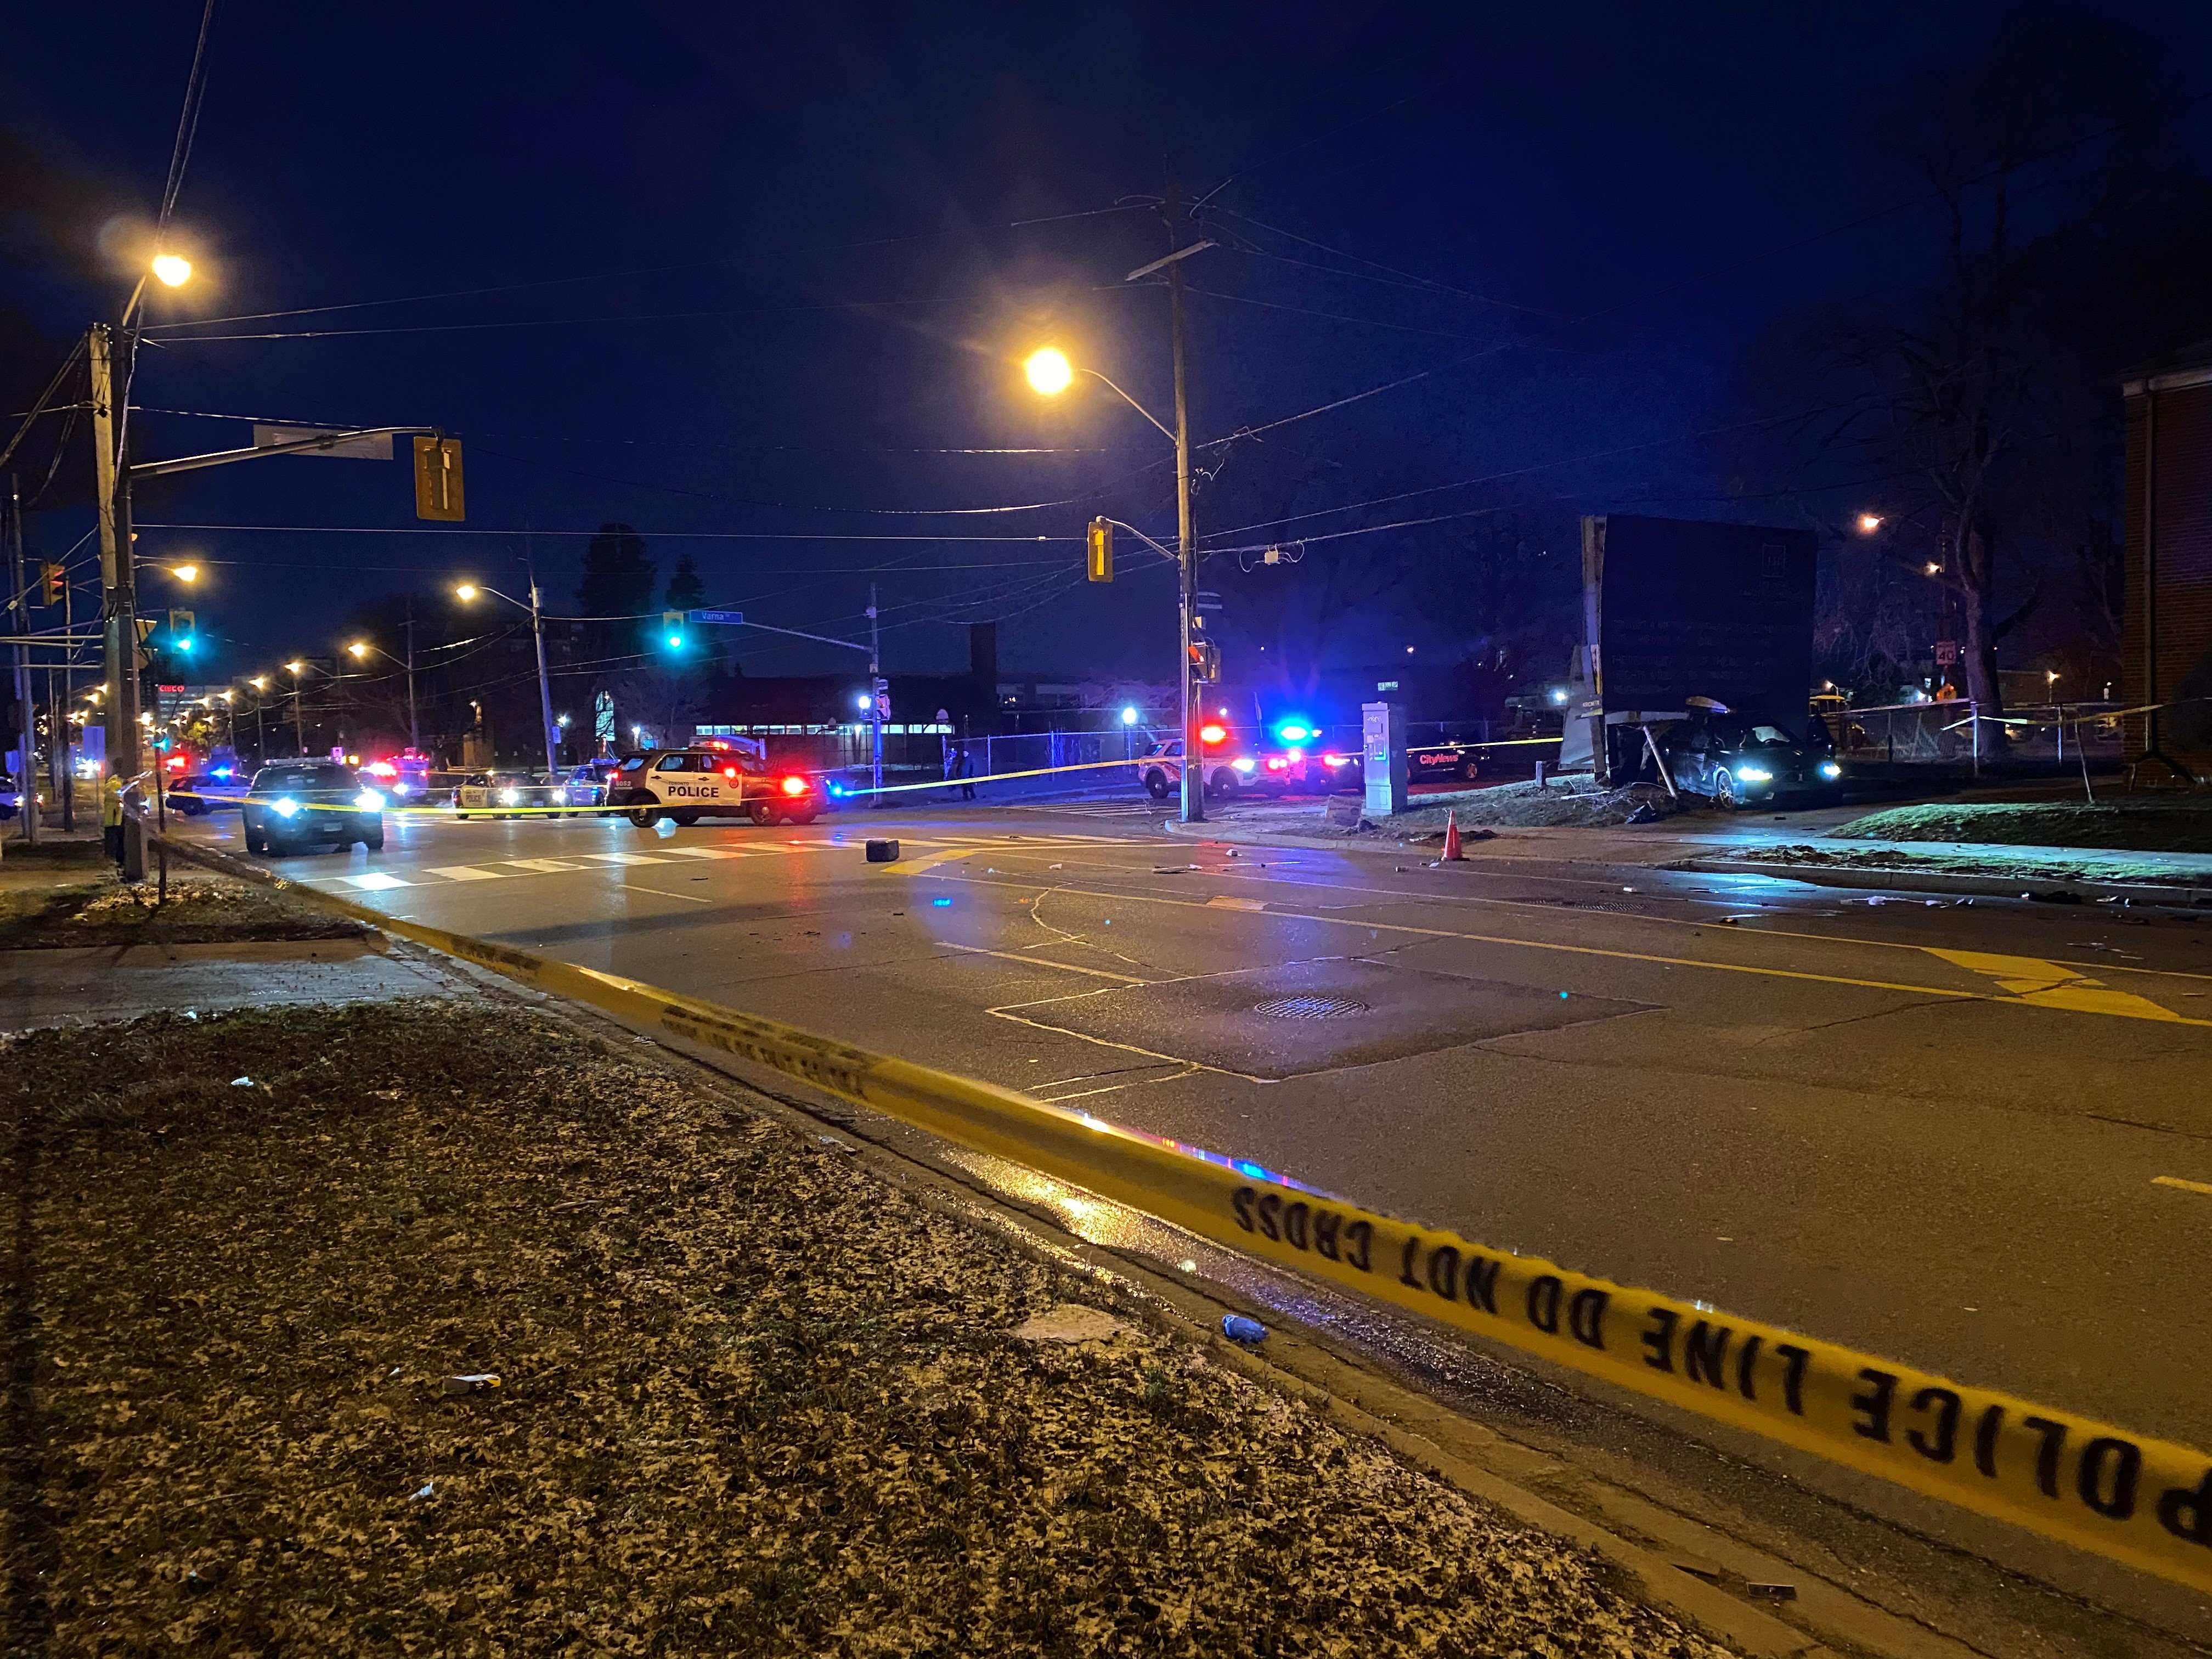 Pedestrian dies after being hit by vehicle in Toronto, driver arrested for impaired driving